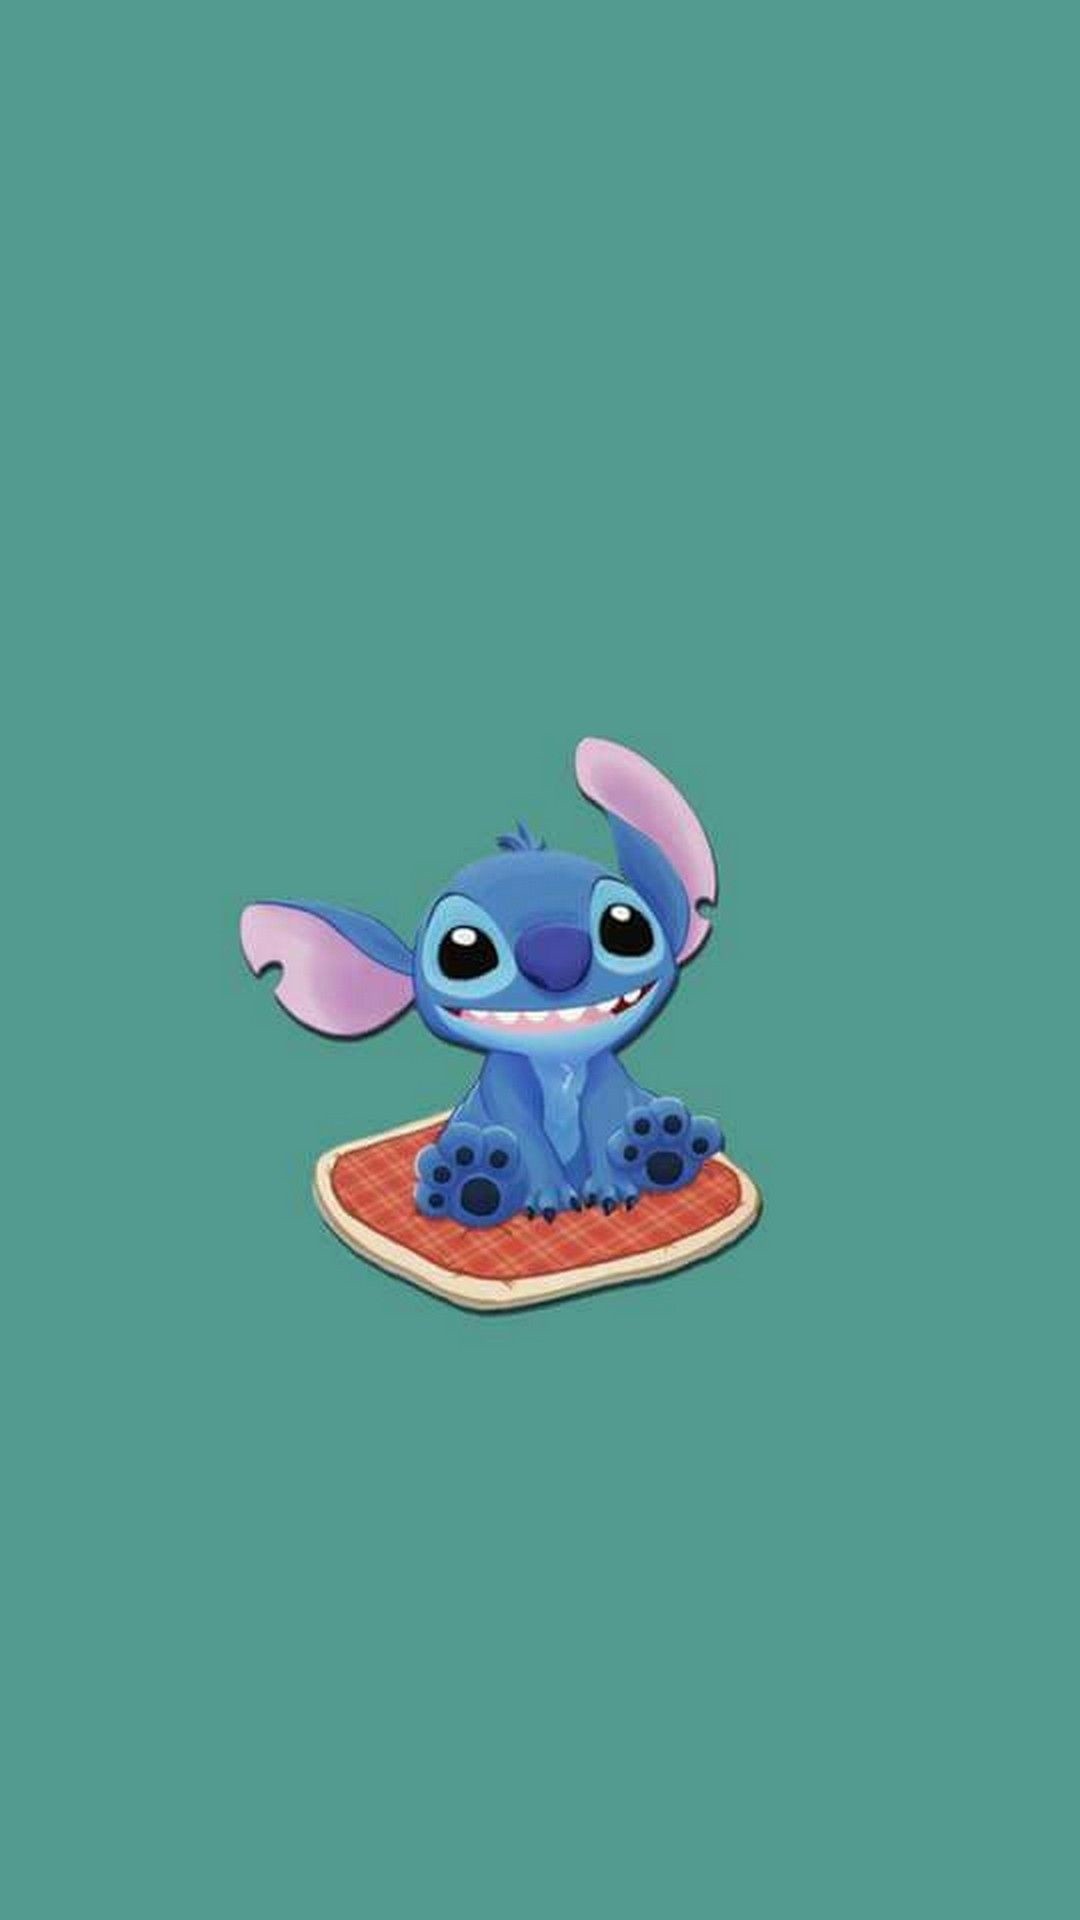 Stitch wallpaper for android